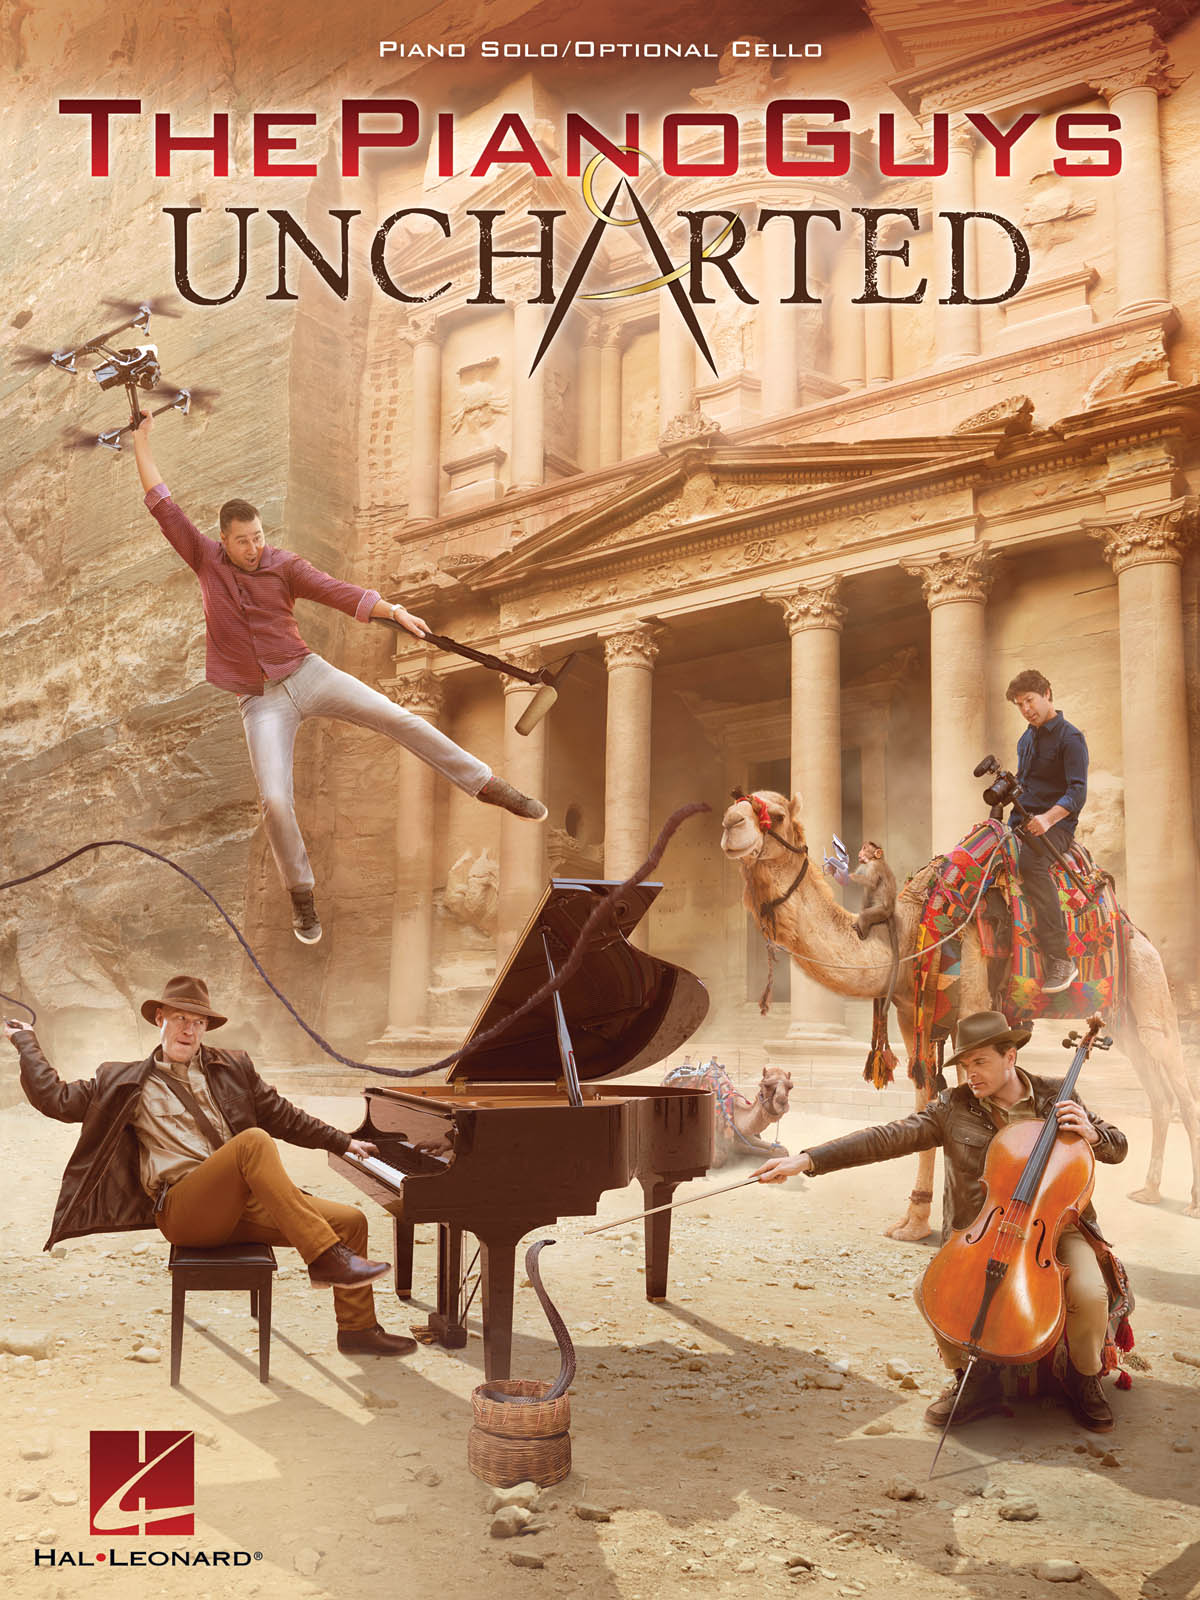 The Piano Guys - Uncharted - Piano Solo with optional cello